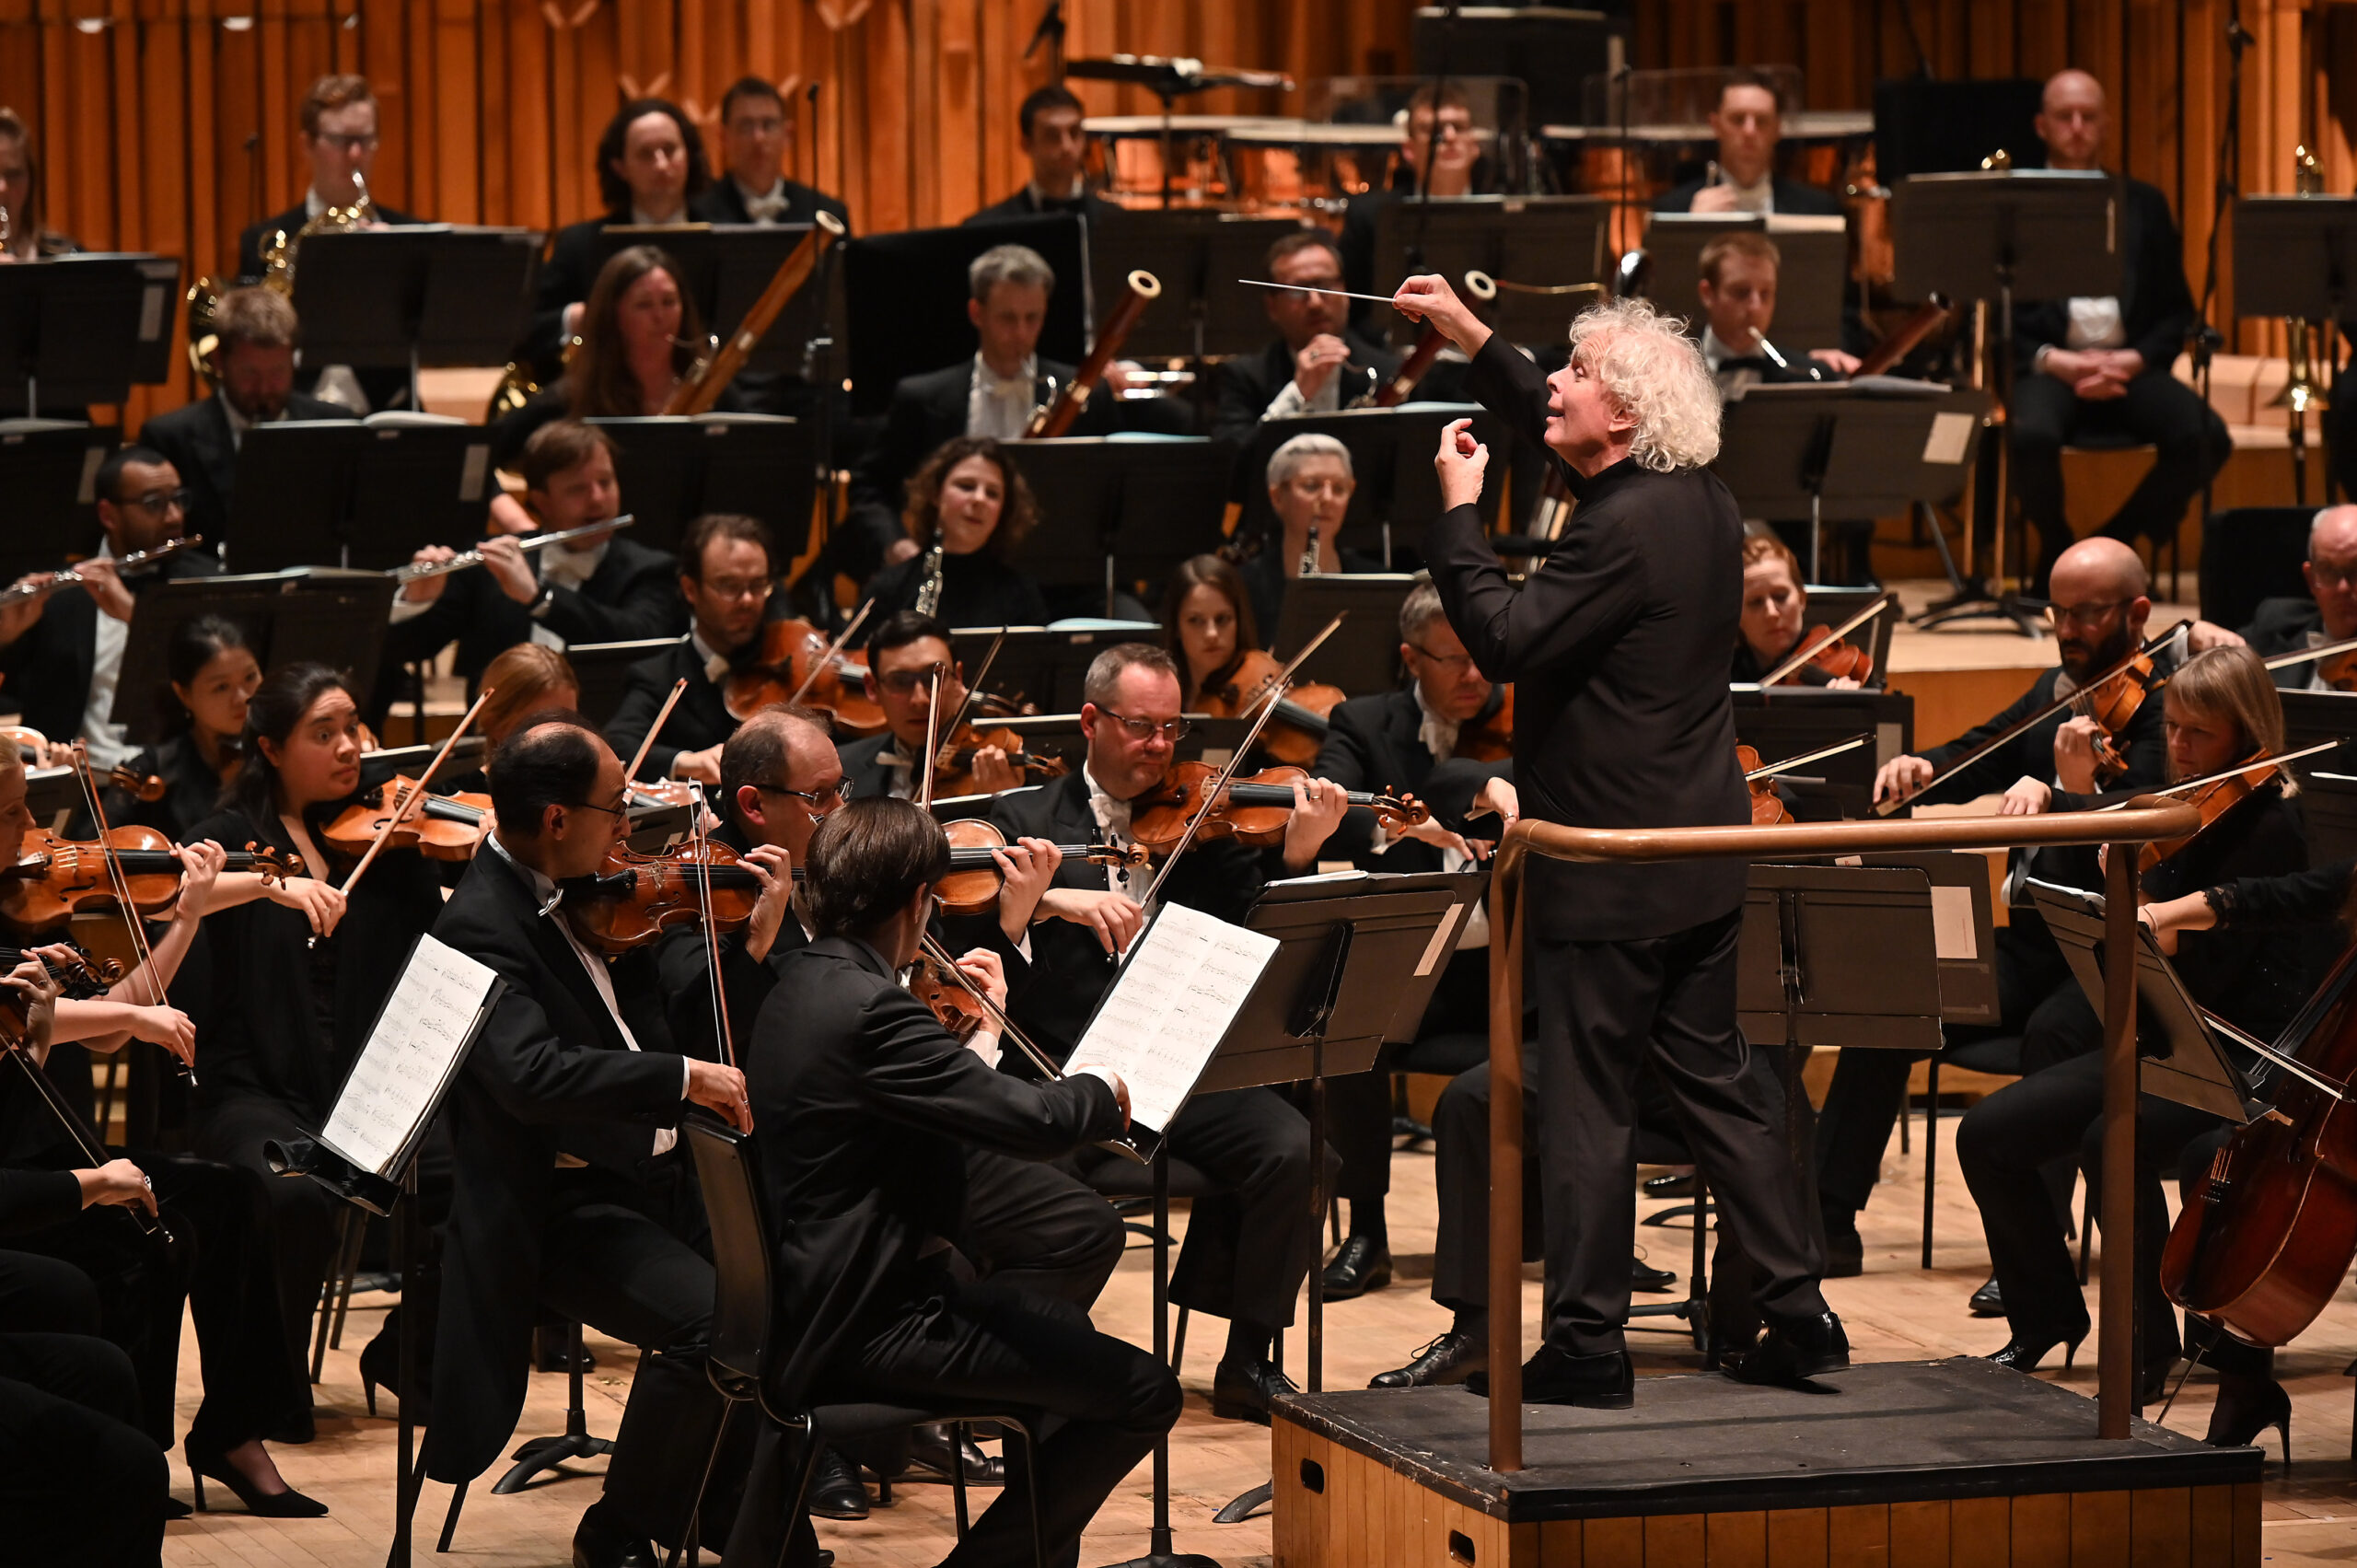 The LSO conducted by Sir Simon Rattle perform Sibelius: Symphony No7, Hans Abrahamson: Let Me Tell You (B Barbara Hannigan:soprano) and Nelson: Symphony No4, 'Inextinguisahable' in the Barbican Hall on Thursday 10 Jan. 2019. The LSO are joined by 12 Keston MAX Fellows Photo by Mark Allan